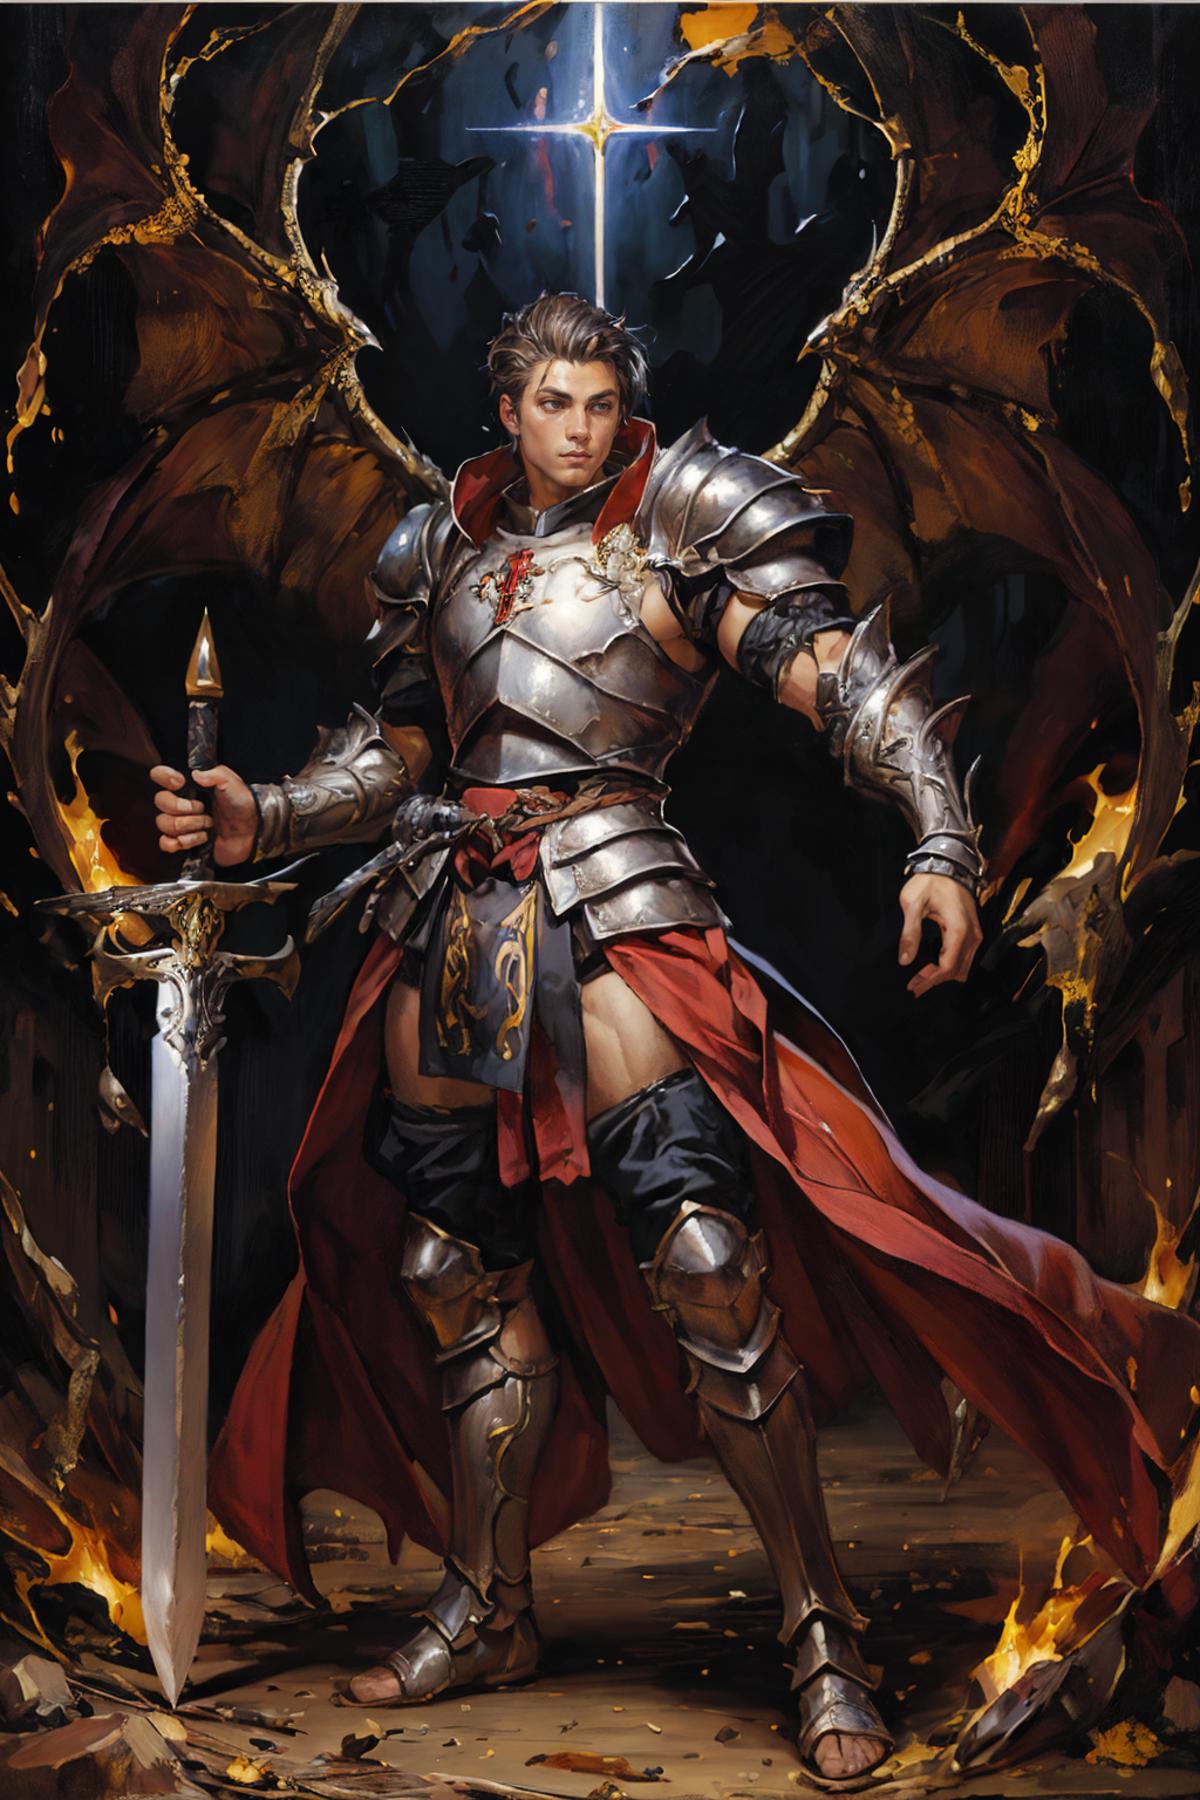 A fantasy illustration featuring a warrior in a red robe and silver armor, holding a sword and a shield.